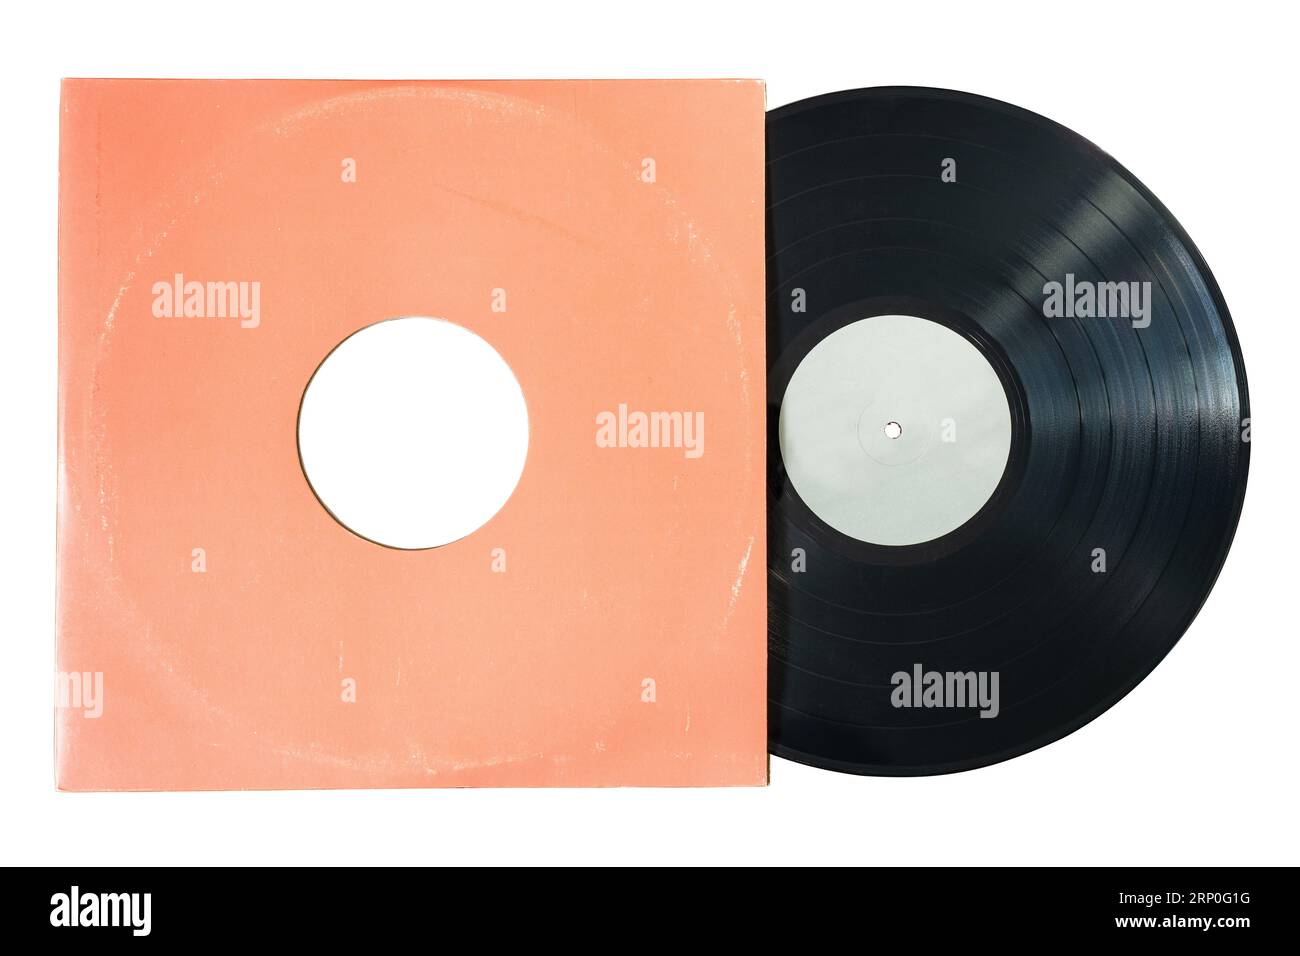 Vinyl record in a orange paper sleeve album cover on white background with clipping path Stock Photo